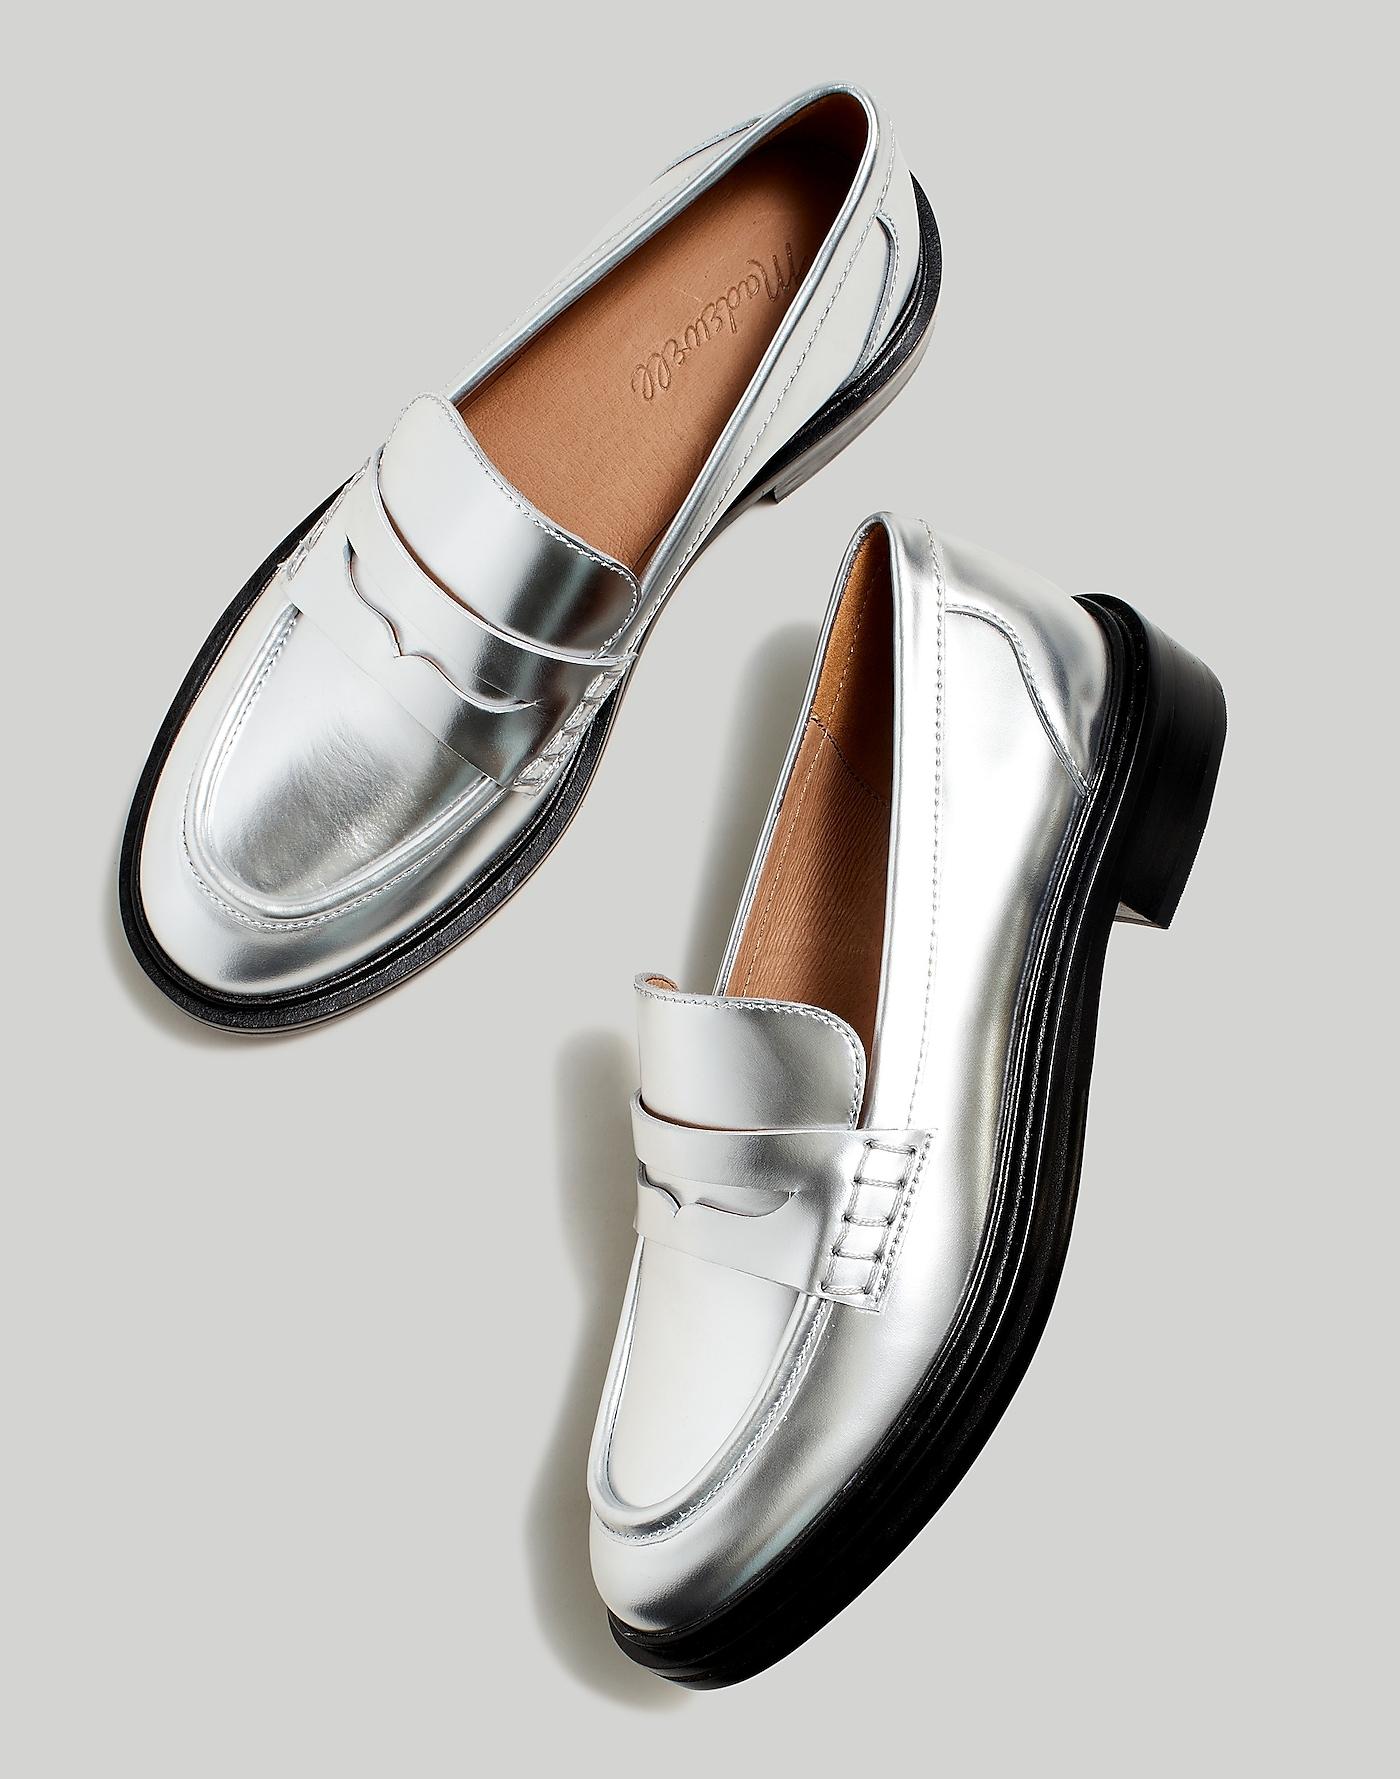 MW The Vernon Loafer In Specchio Leather in Metallic | Lyst